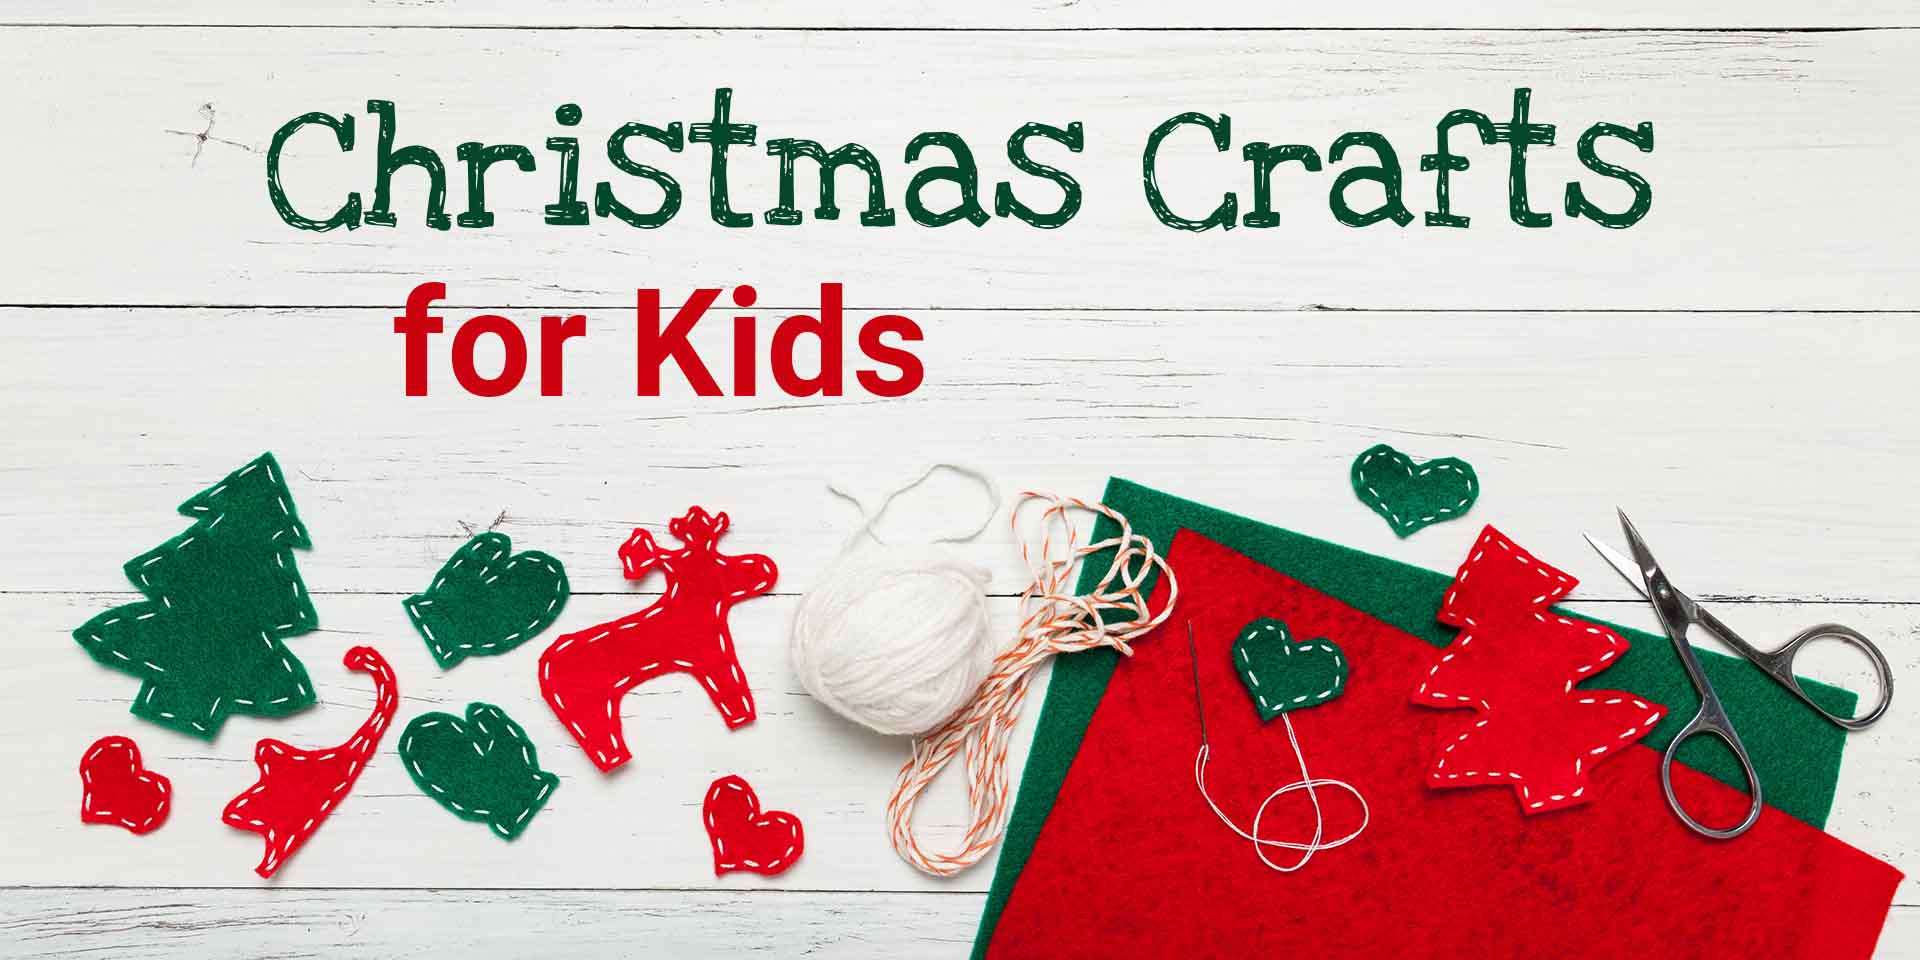 Melted Crayon Craft for Christmas - The Kindergarten Connection